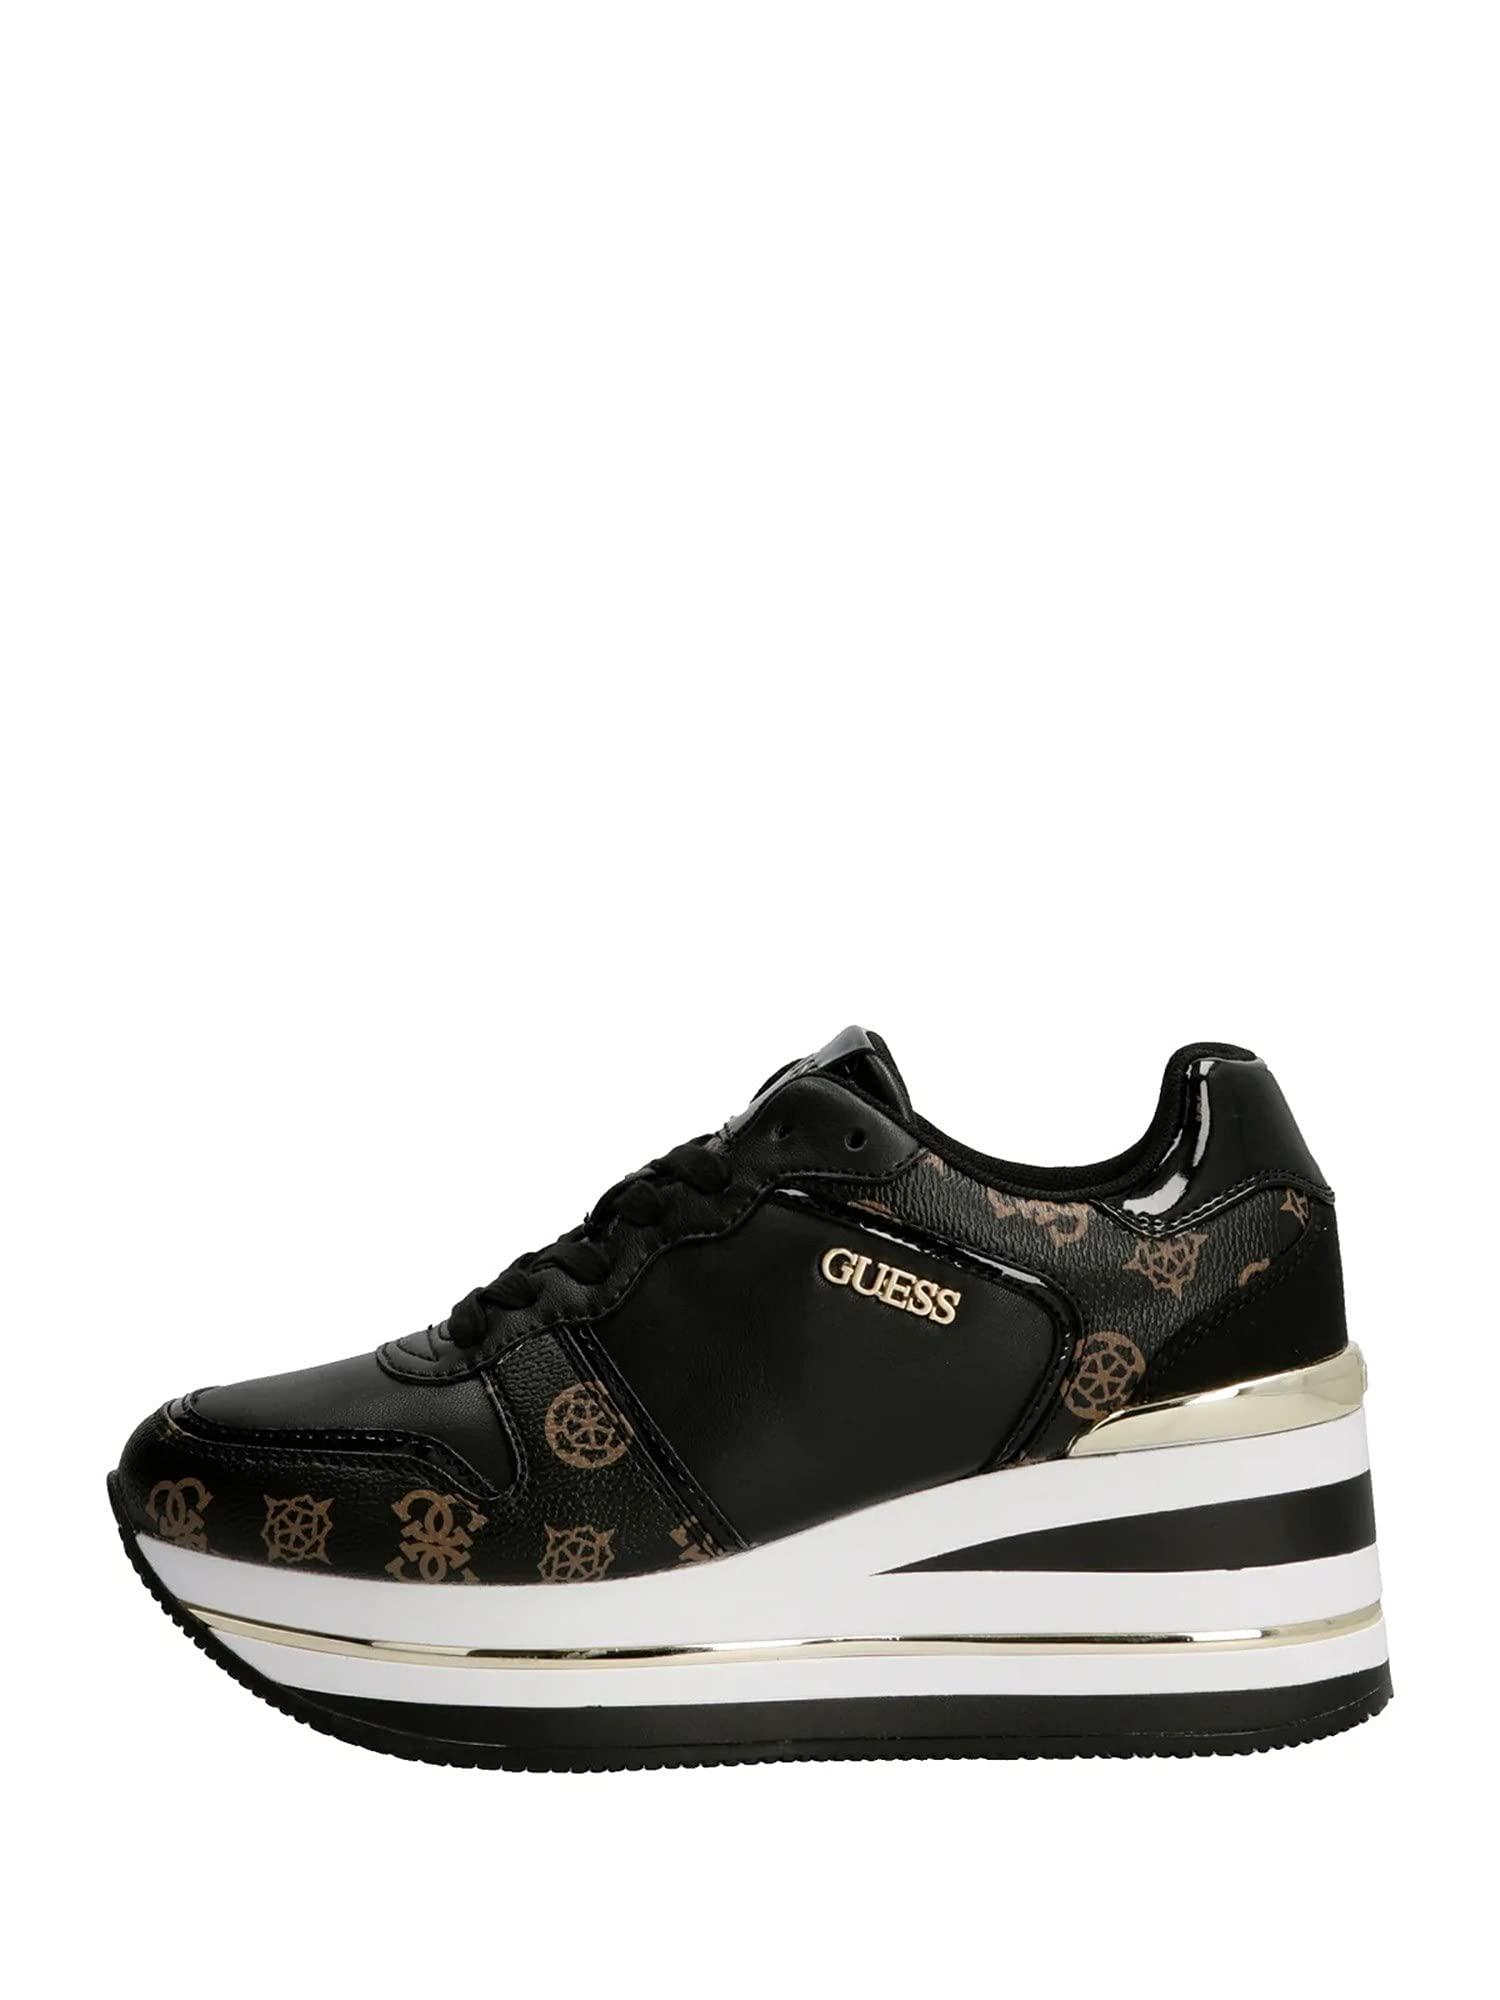 Guess Bradly Black Womens Eco Leather Platform Trainers